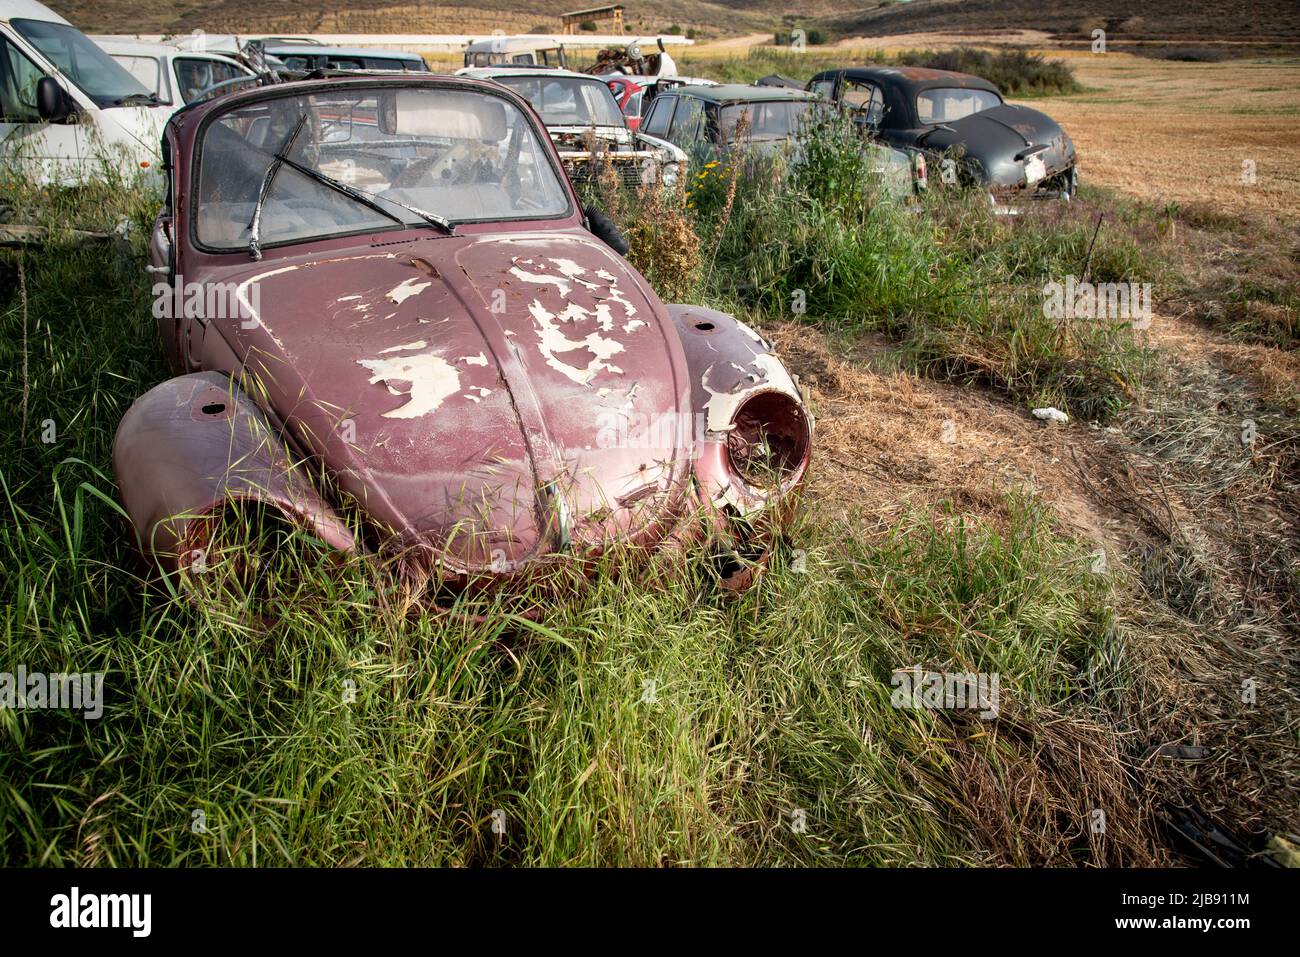 Car junkyard with wreck of a destroyed cars. Environmental pollution metal recycling. Stock Photo